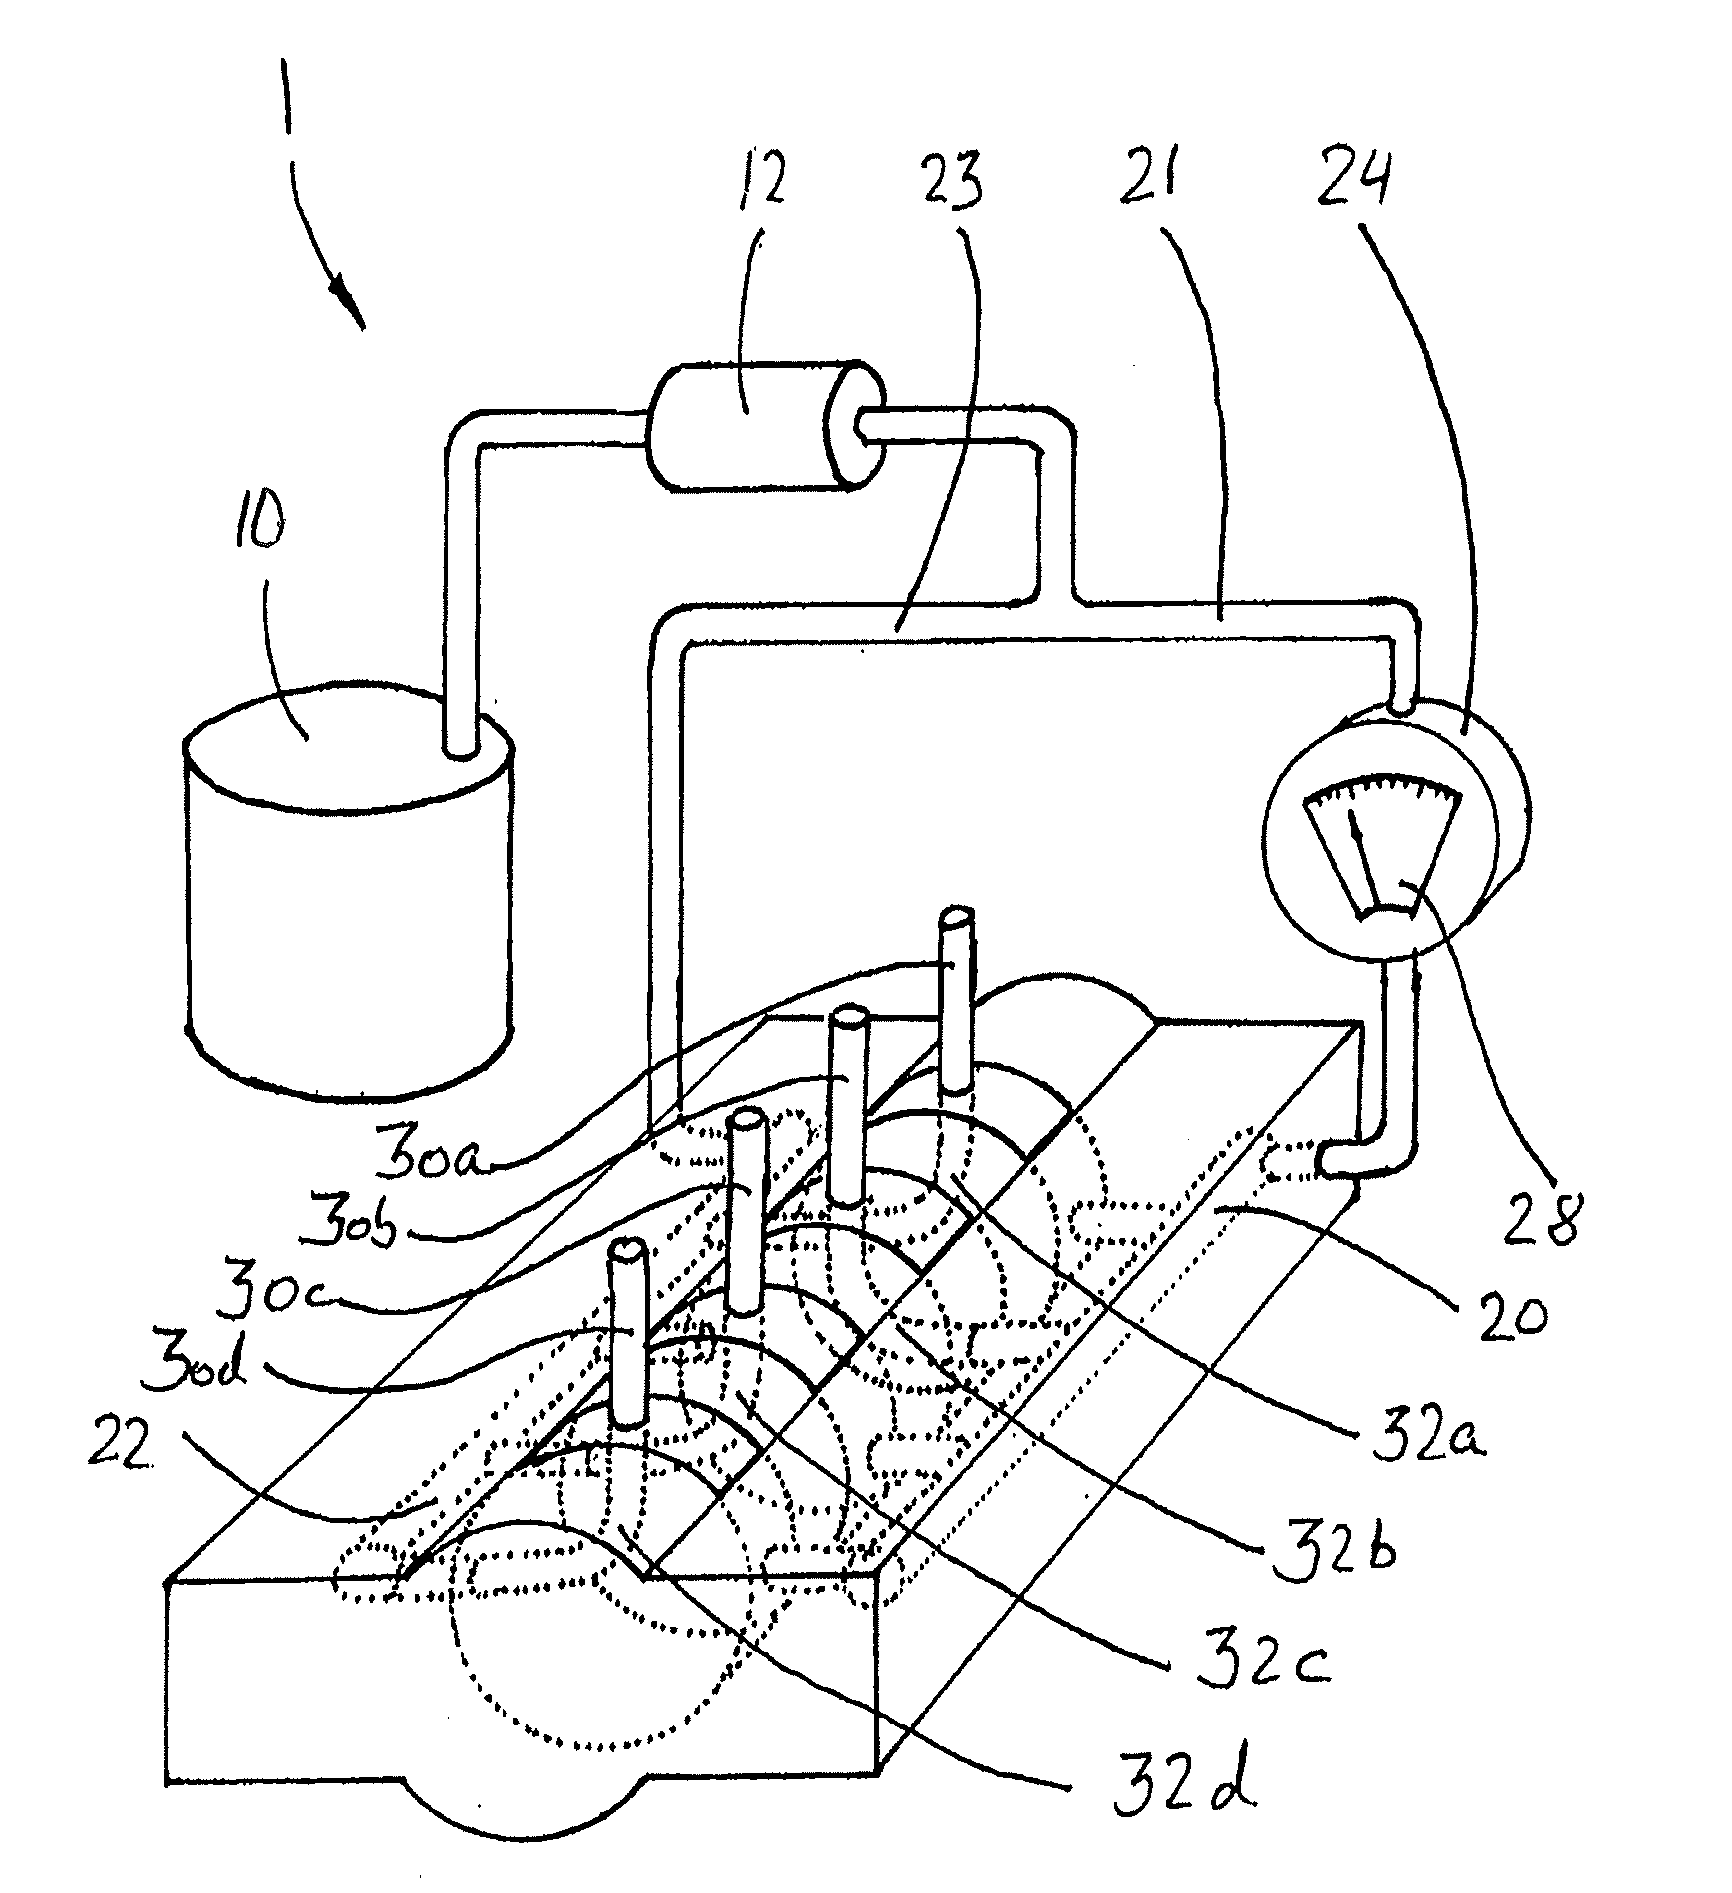 Method and device for rinsing endoscope channels